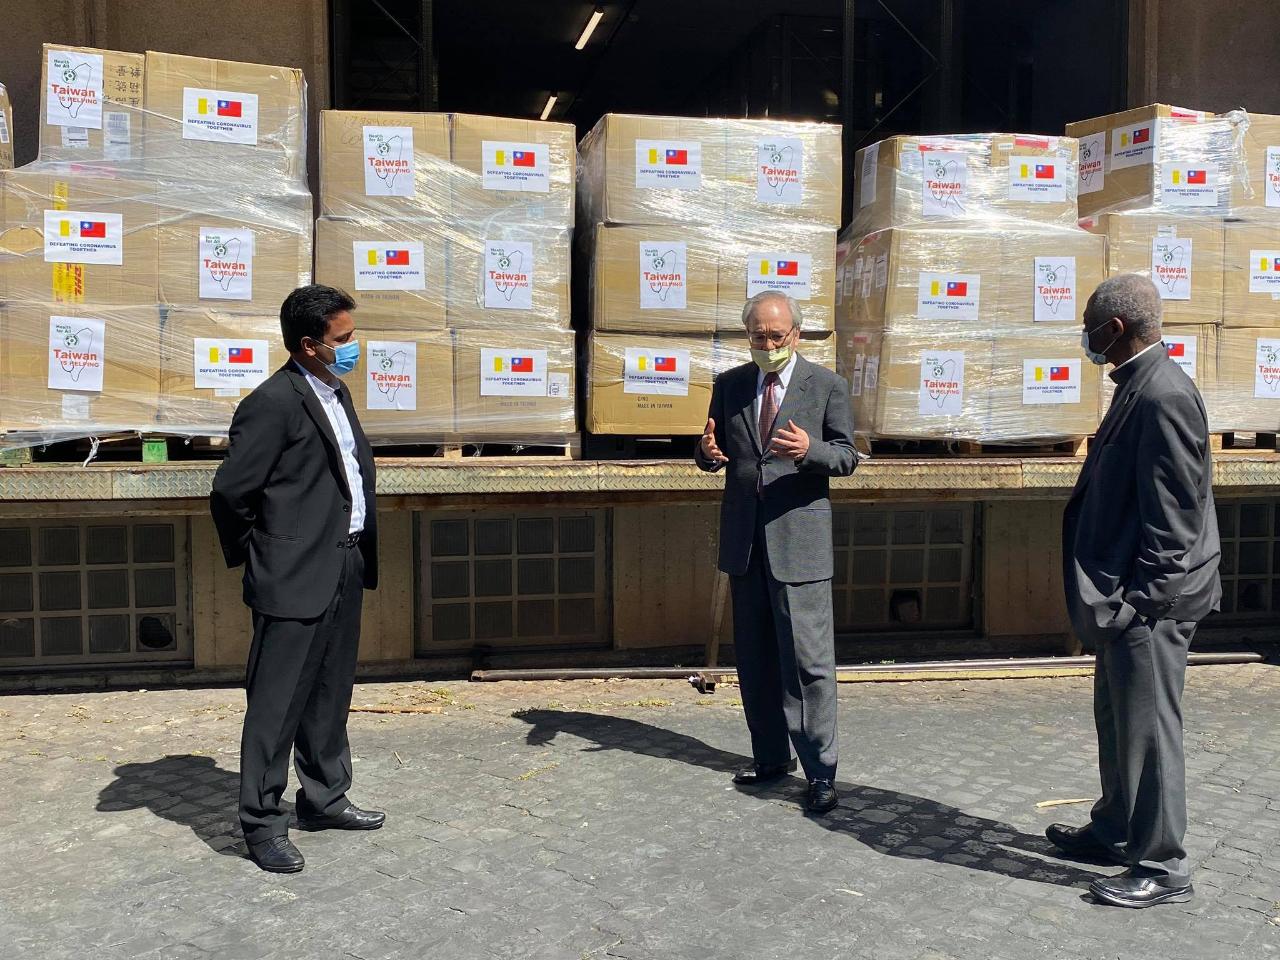 In a spirit of collaboration, Taiwan donated 200,000 masks along with two infrared thermal imaging cameras to the Vatican.
Cumulatively, Taiwan has already provided 480,000 face masks and other relief goods such as rice cookers and canned food to the Vatican in April alone.